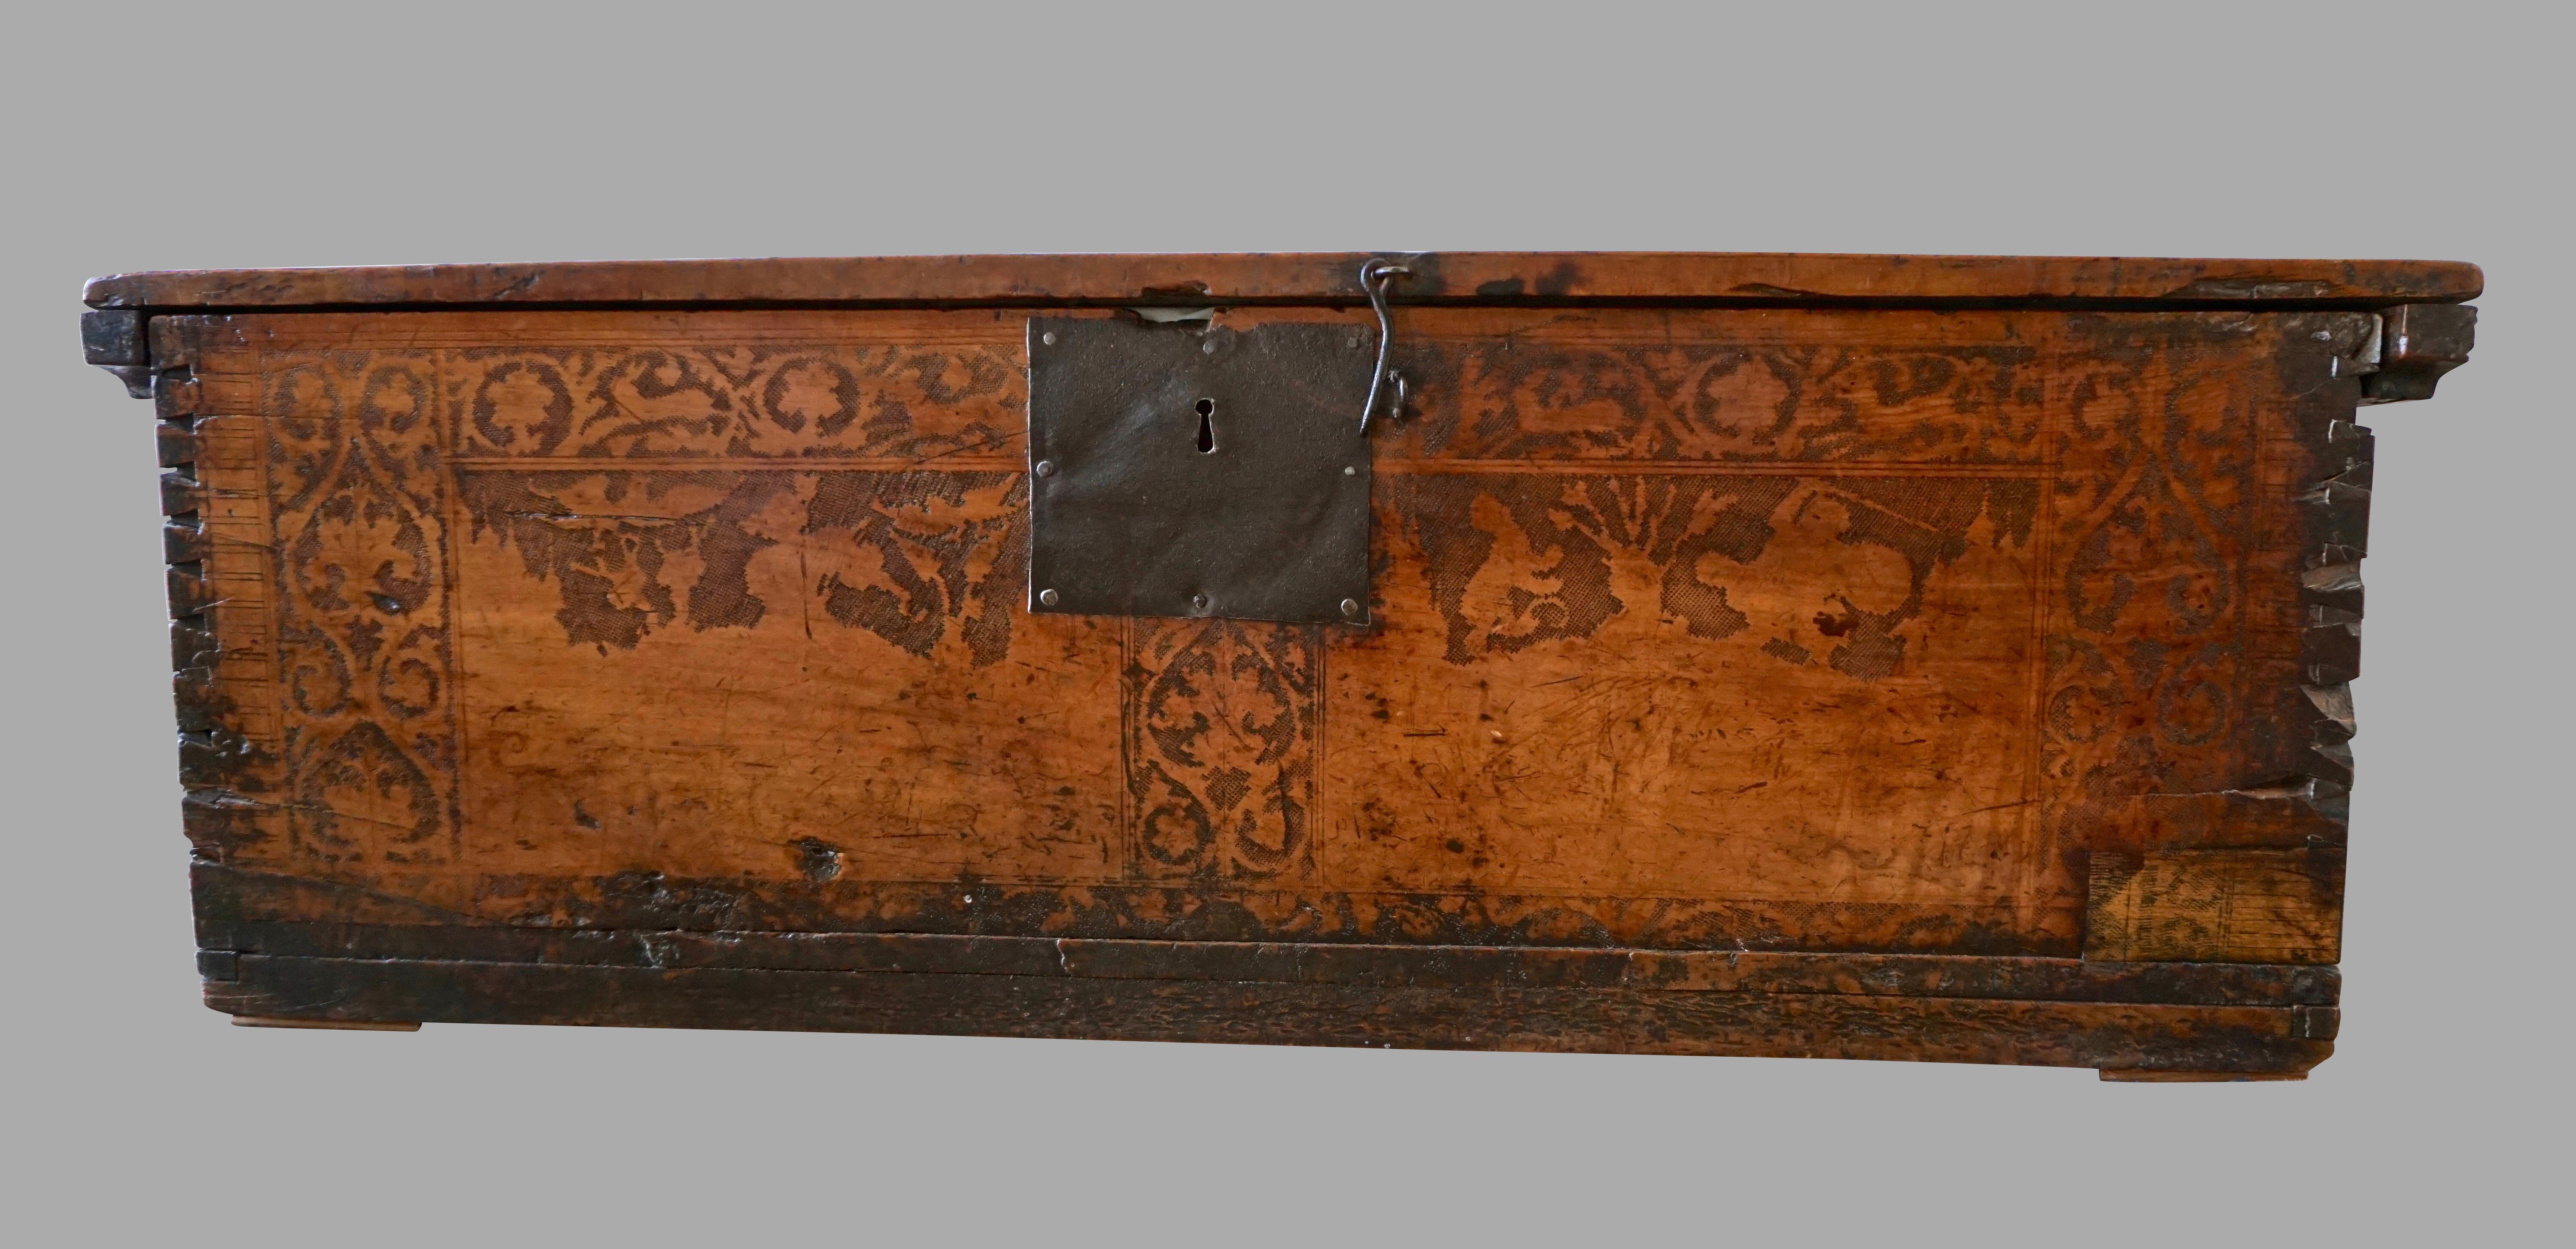 An interesting and highly decorative Italian walnut coffer with dovetailed corners, the front and inside of the top decorated with various incised themes, including a coat of arms, flowers and animals. Fine old patina and color. Provenance: